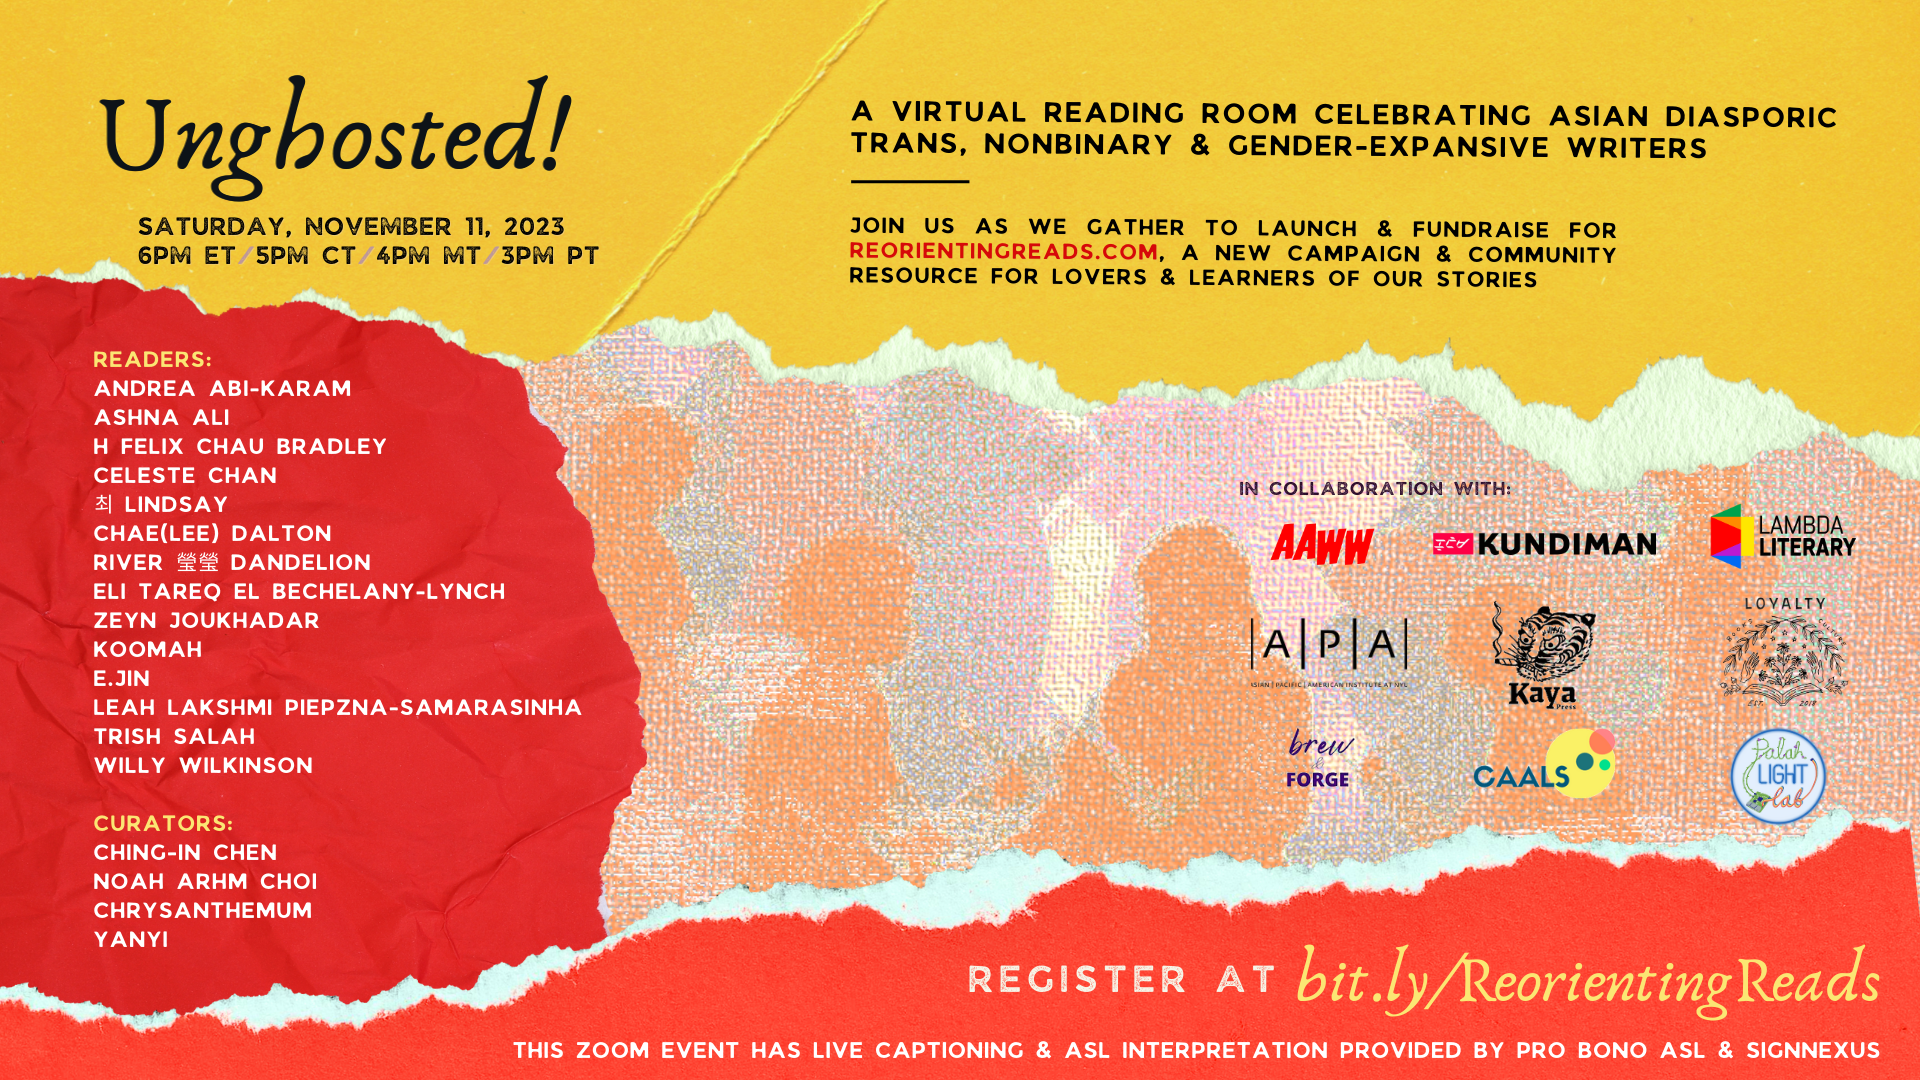 [VIRTUAL] Unghosted! A Virtual Reading Room Celebrating Asian Diasporic Trans, Nonbinary & Gender-Expansive Writers